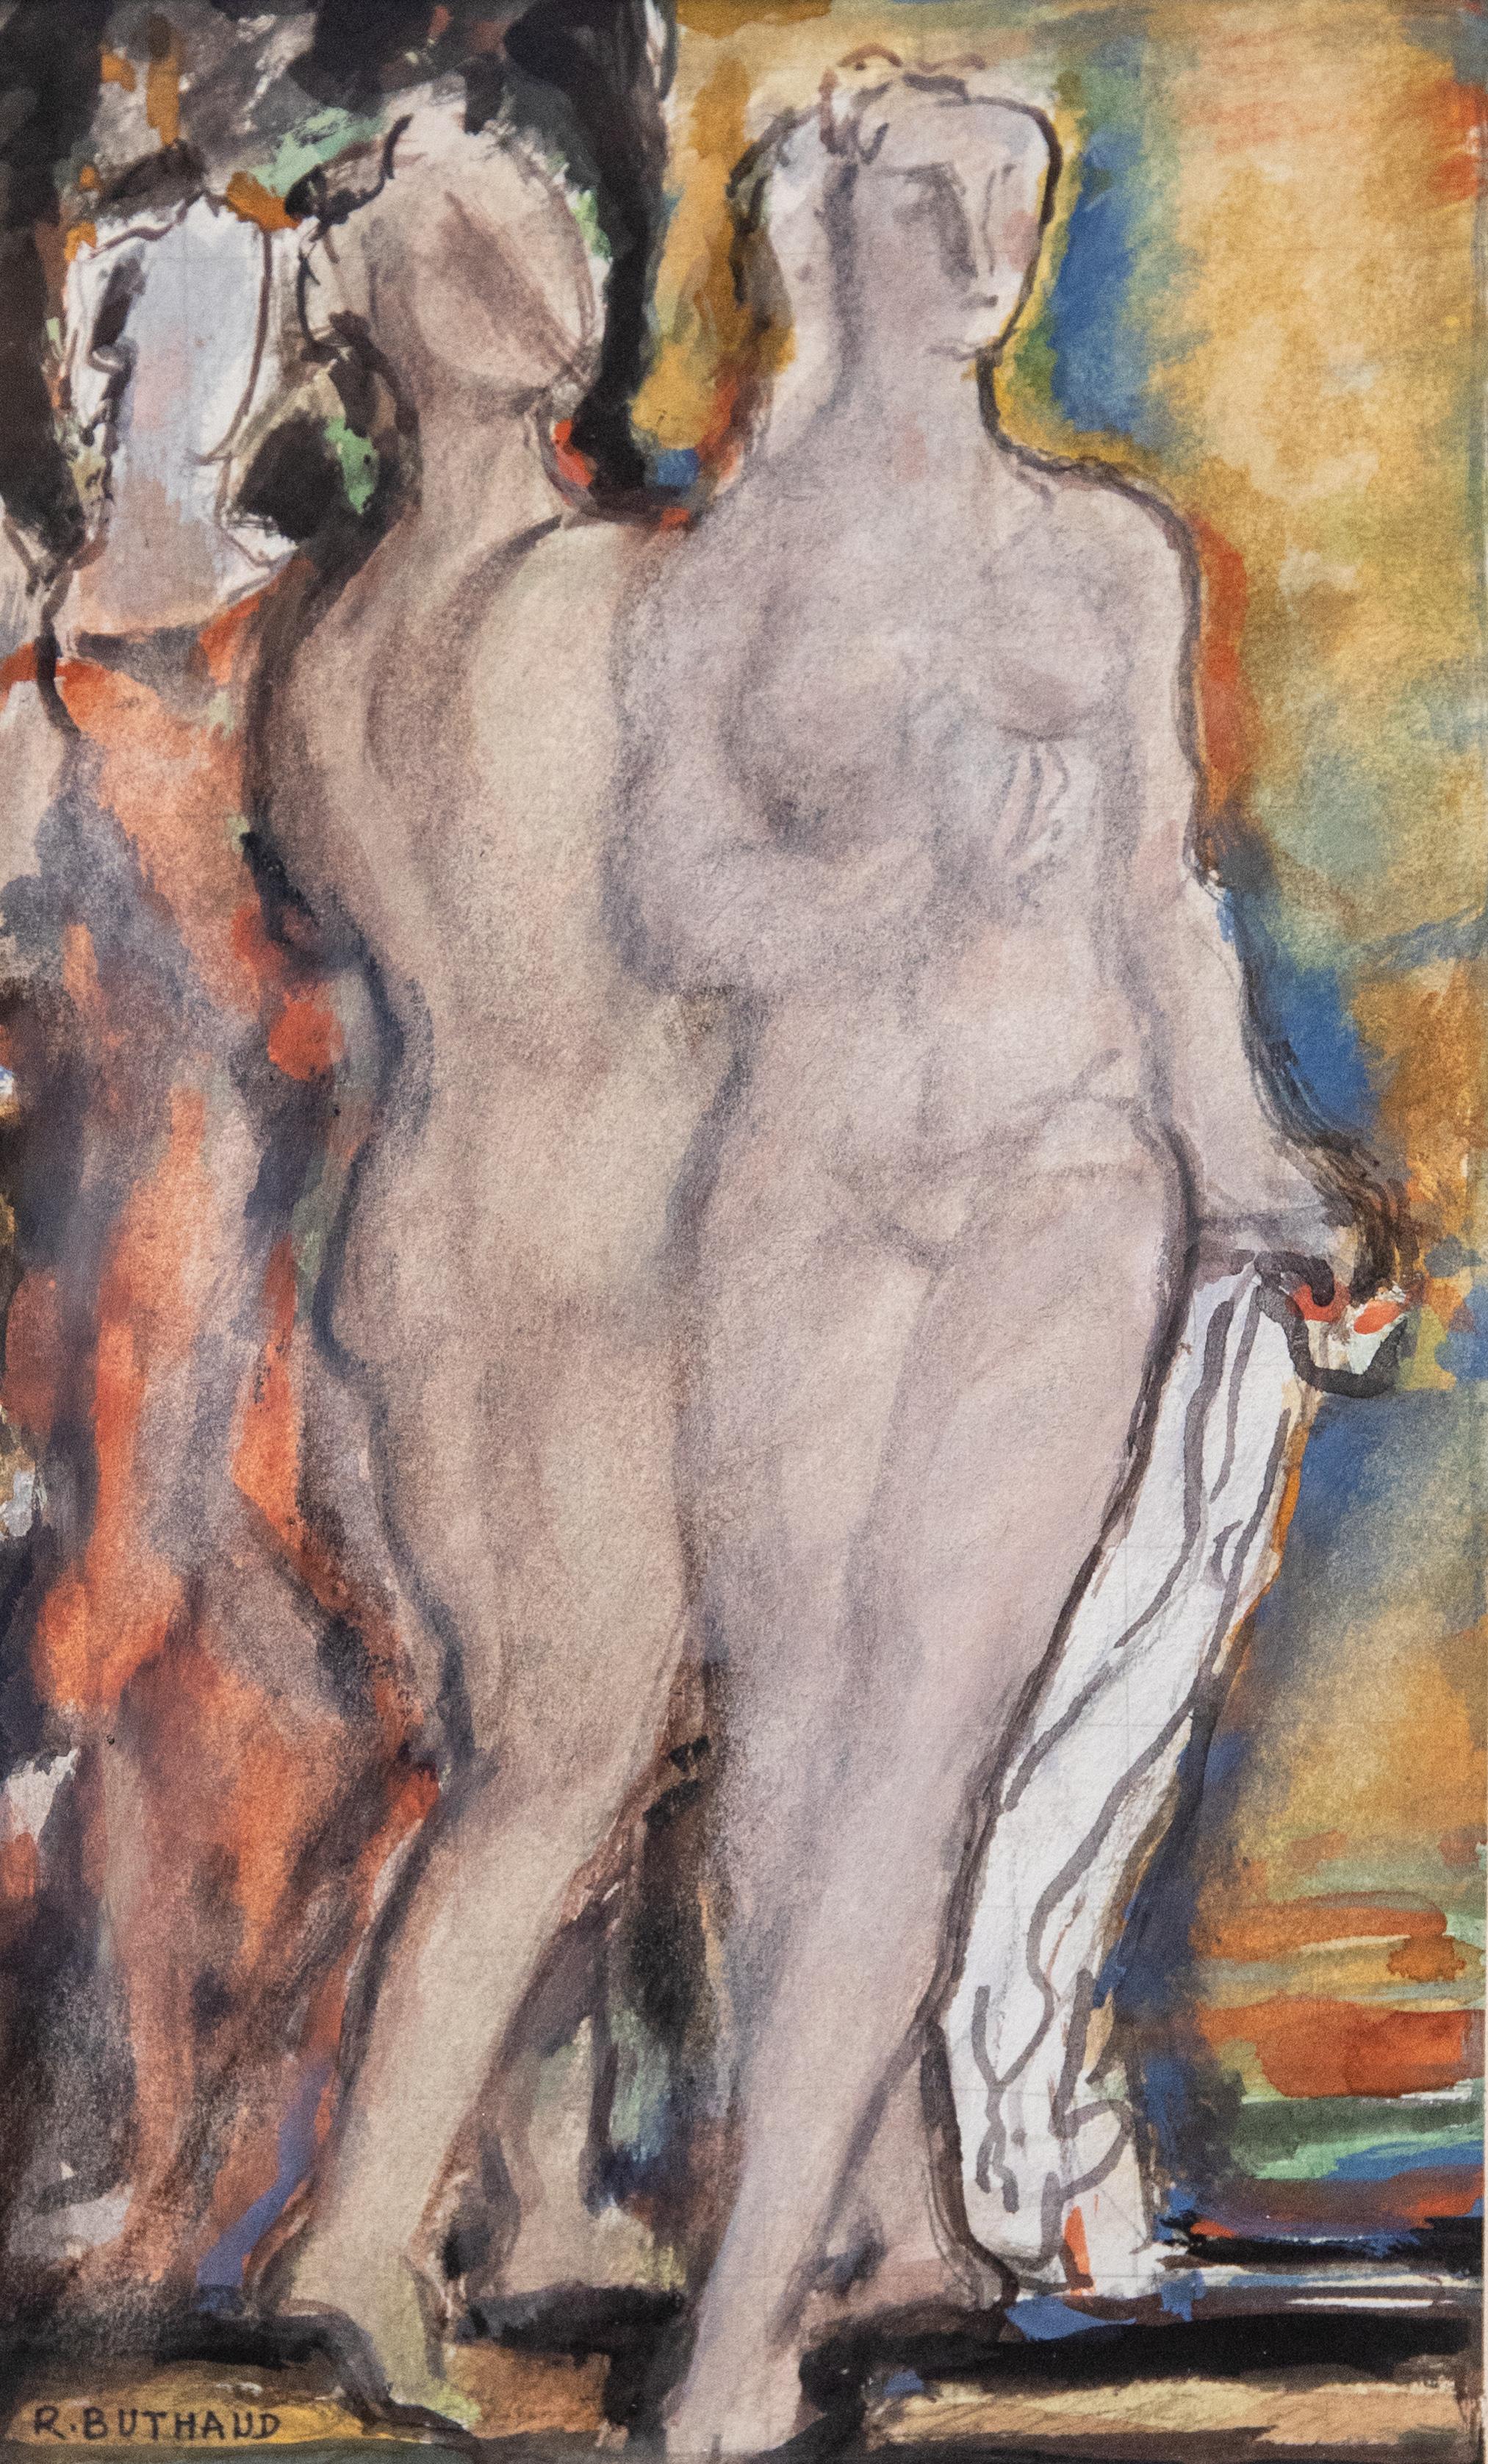 René Buthaud midcentury nude study, signed gouache on paper. Provenance: The artist, collection Michel Fortin, Paris: Collection of Stephen Engel, Florida: Literature: Cruège, René Buthaud. René Buthaud was seen as the most accomplished and